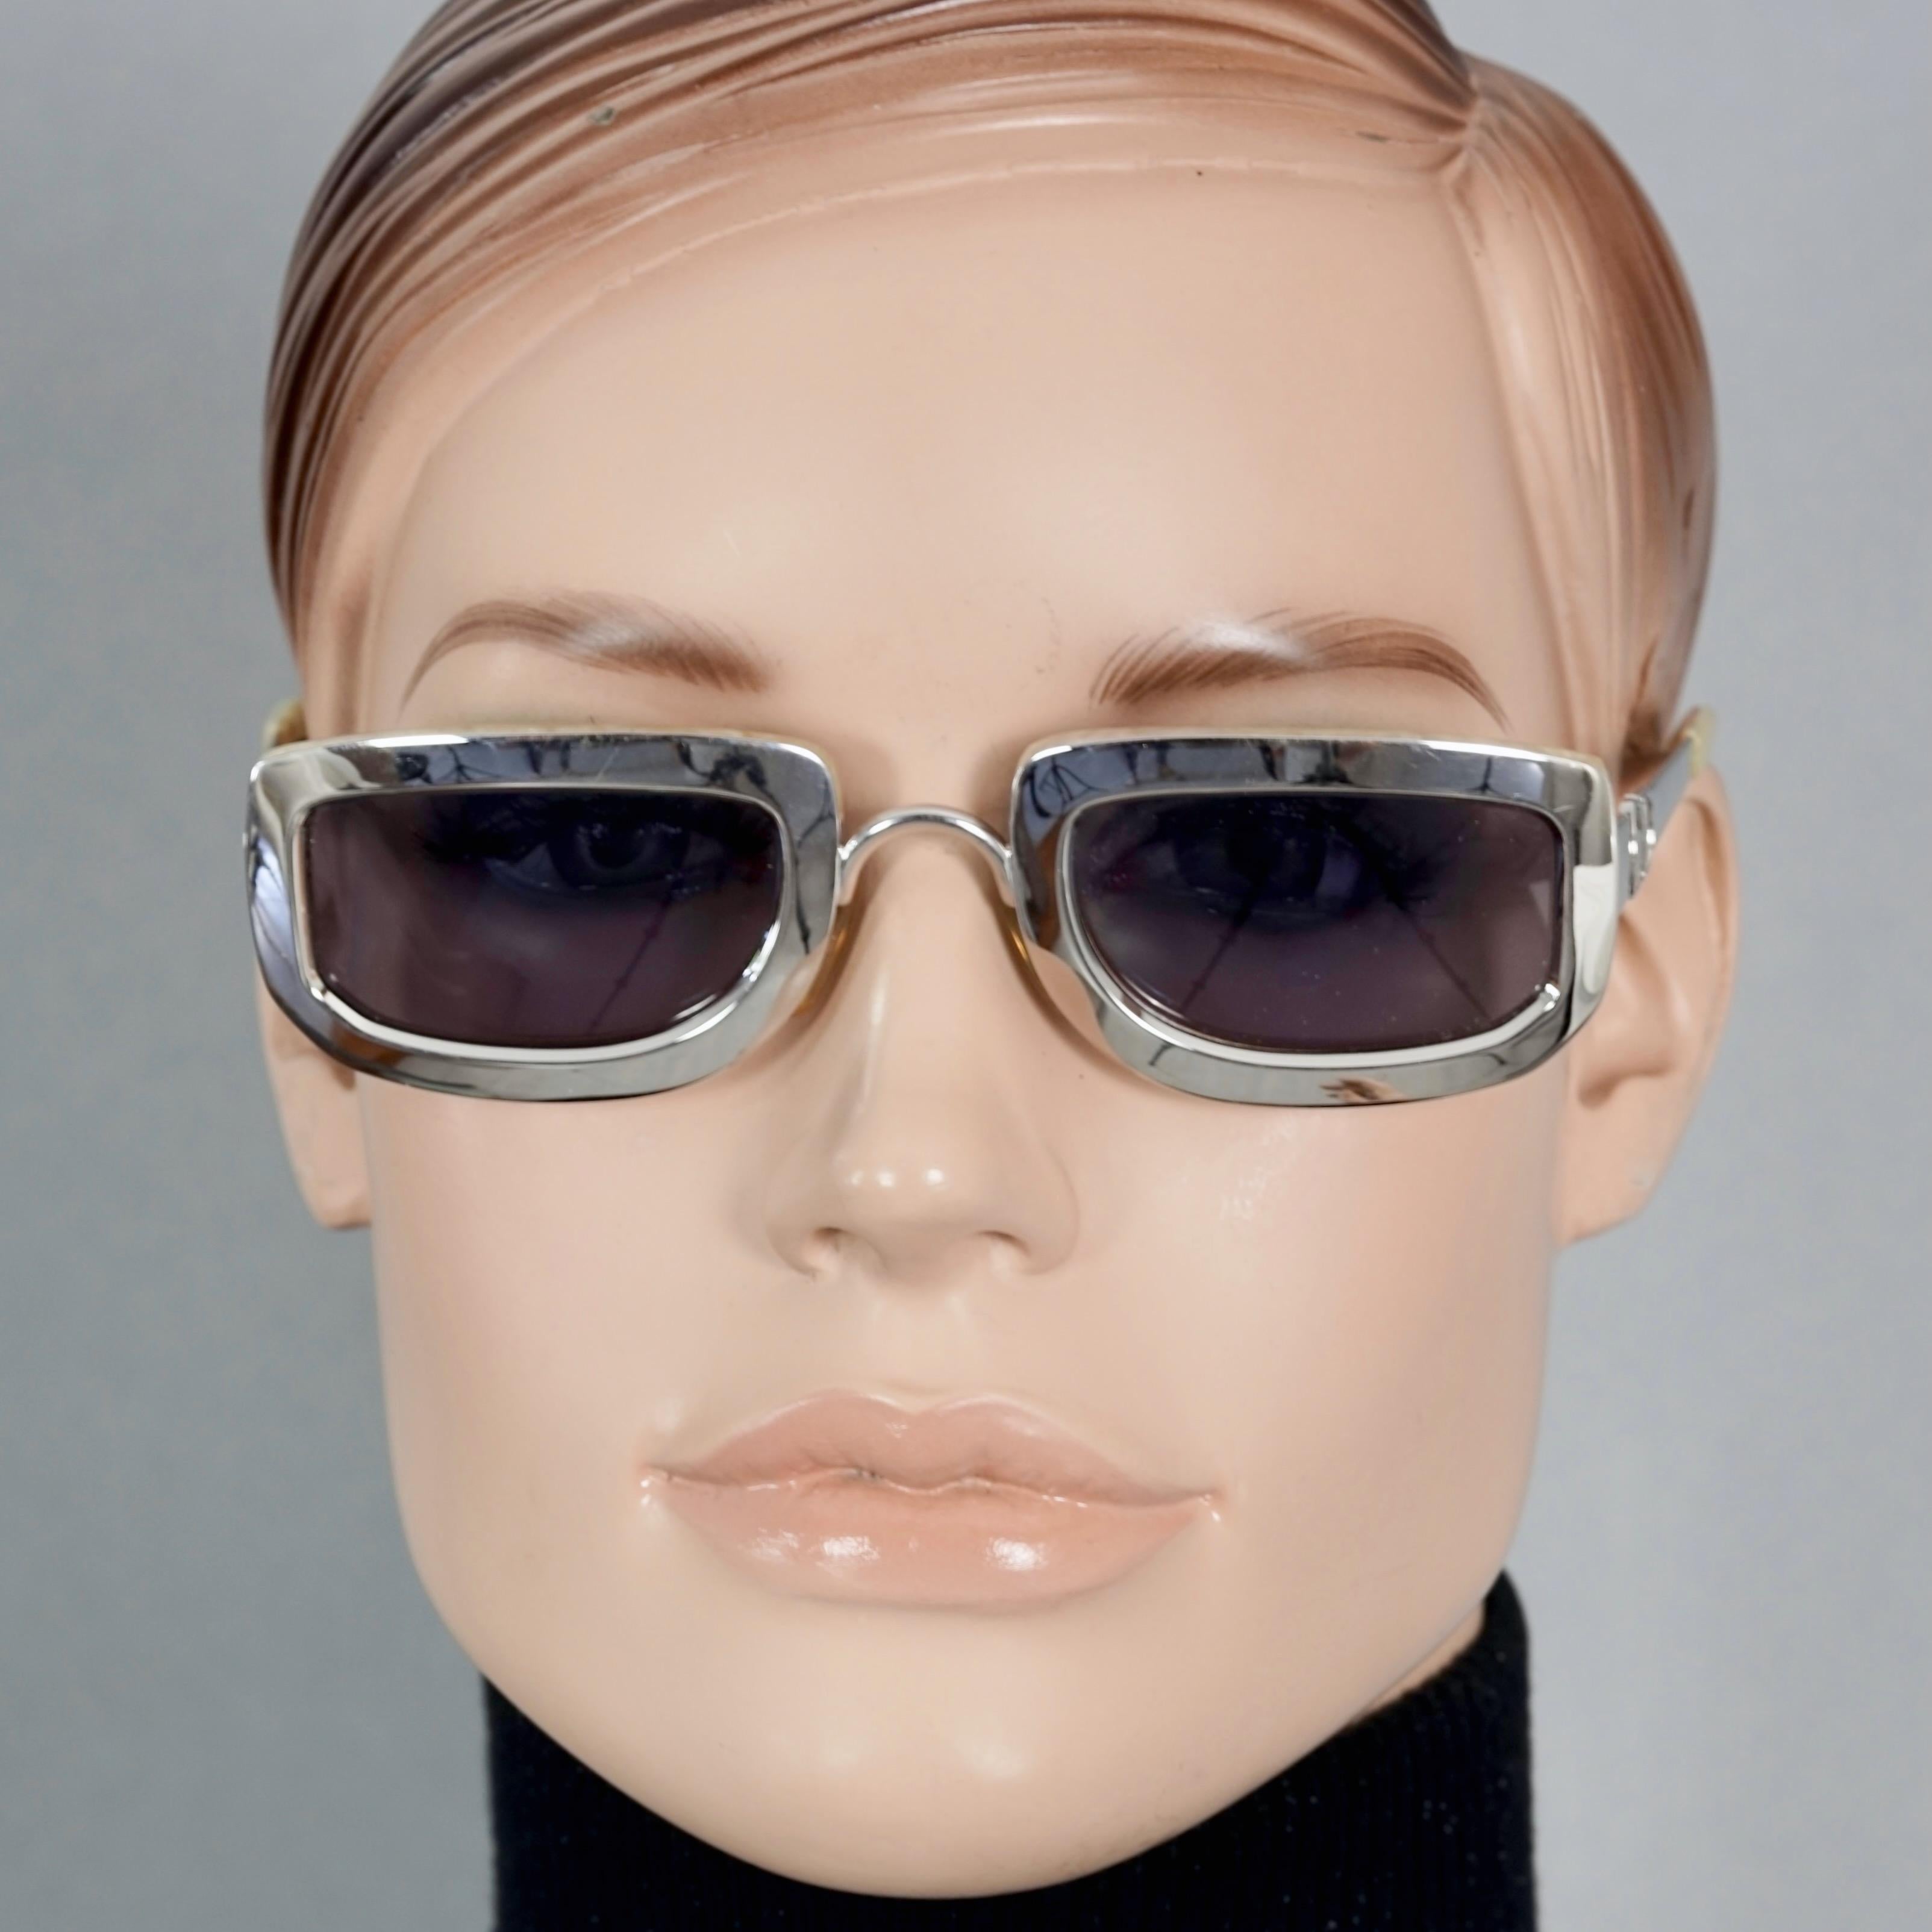 Vintage 1995 CHRISTIAN DIOR Silver Chrome Futuristic Sunglasses

Measurements:
Height: 1.53 inches (3.9 cm)
Horizontal Width: 5.12 inches (13 cm)
Temples: 5.31 inches (13.5 cm)

Features:
- 100% Authentic Vintage CHRISTIAN DIOR. 
- Rectangular